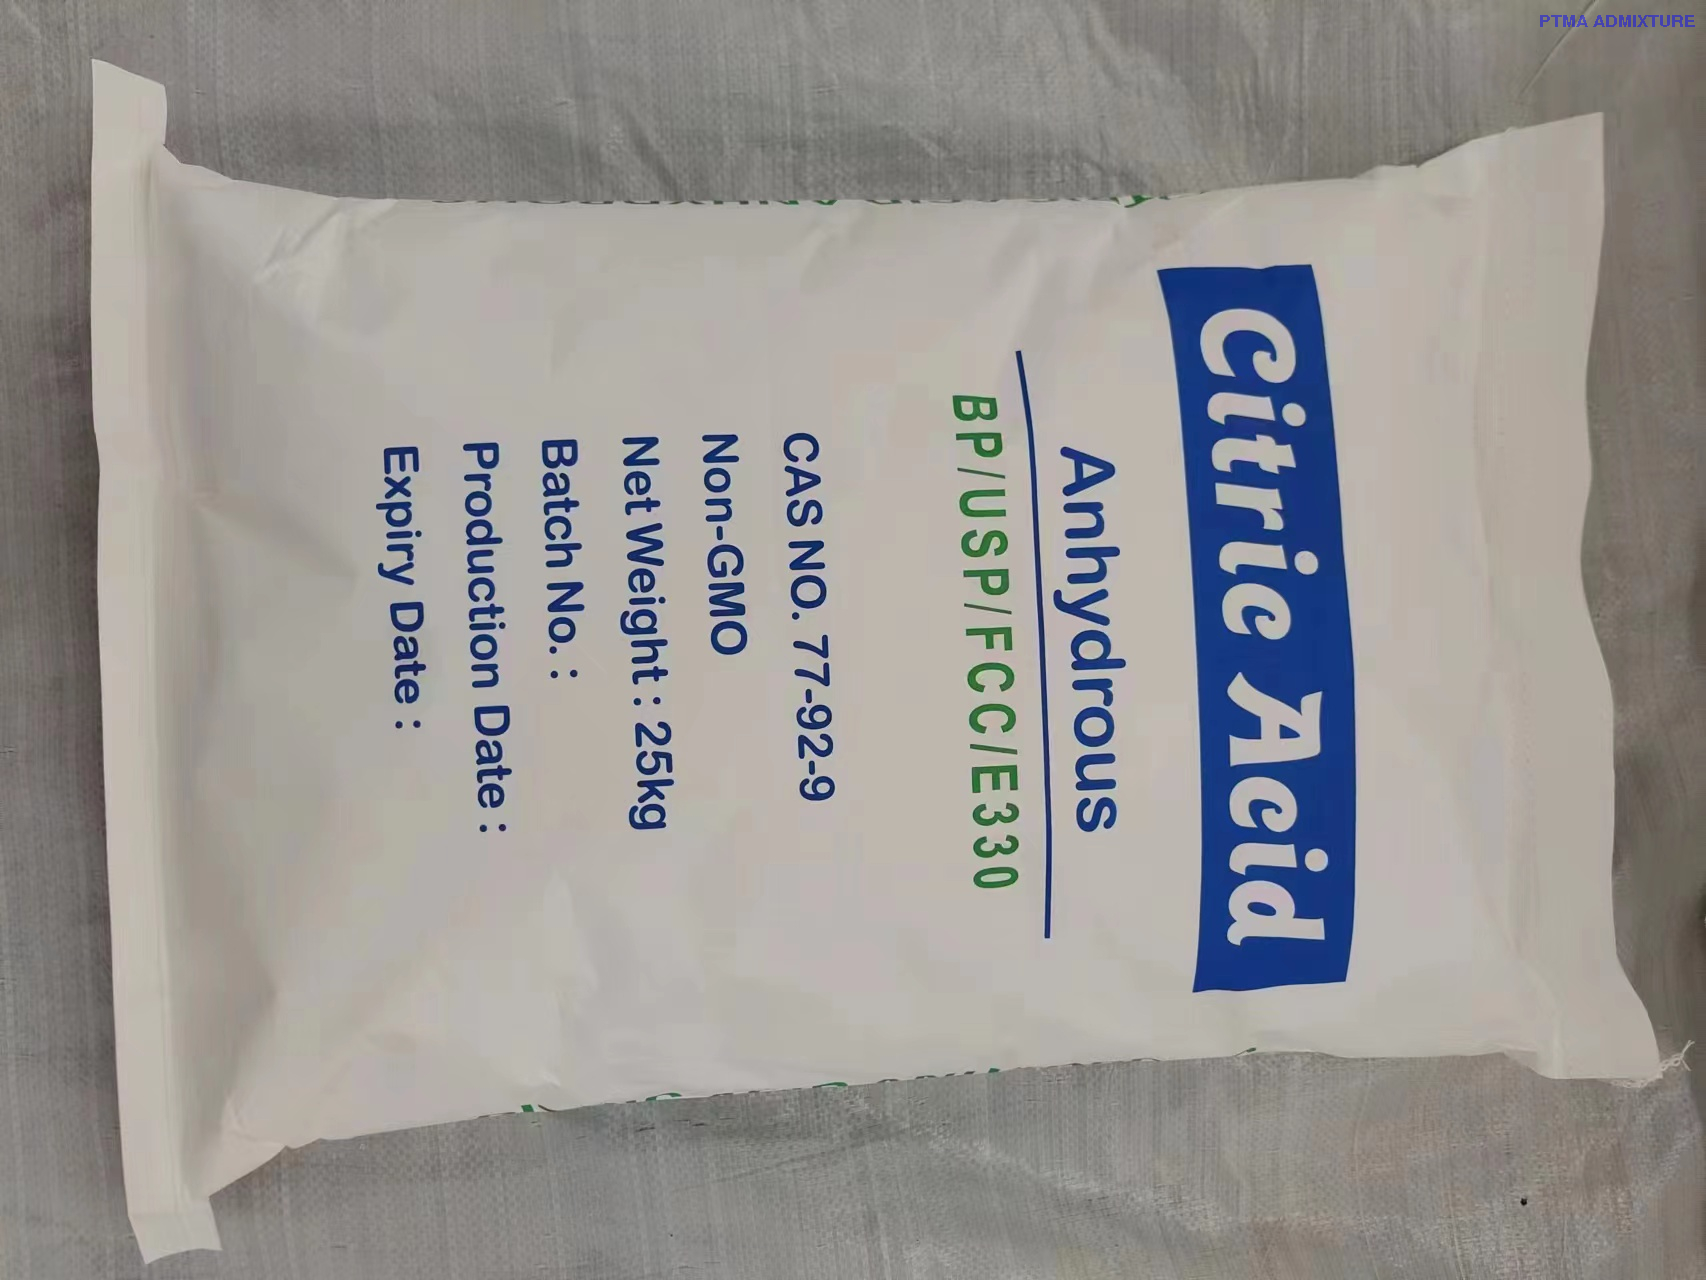 Citric Acid Anhydrous Bulk Supplier in China Manufacturer